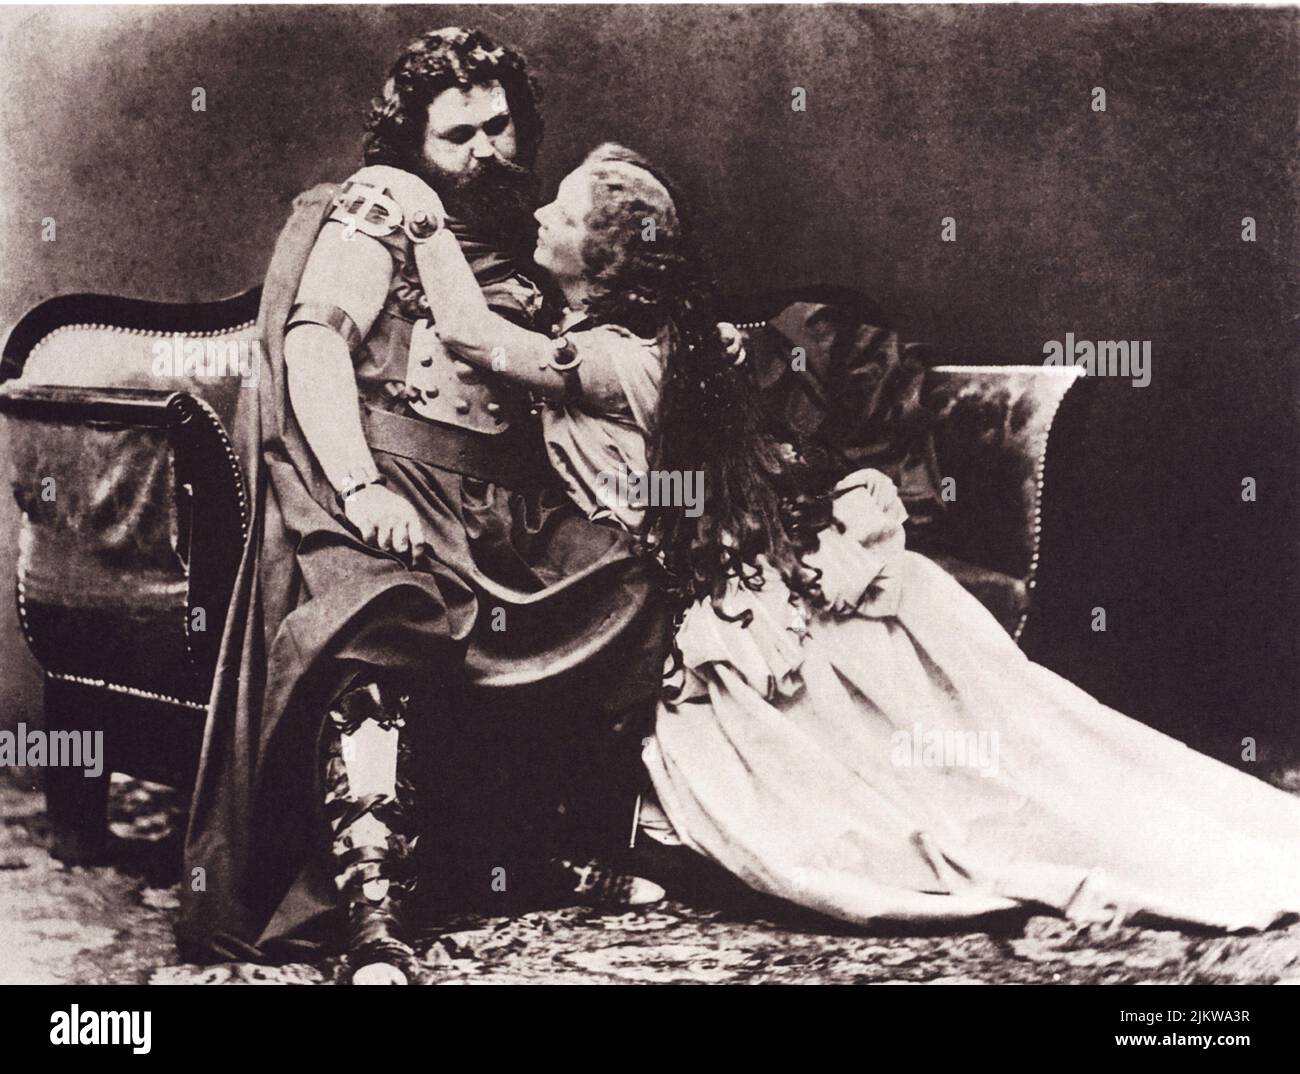 1865 , 6 june , Munchen , Bavaria  :  The mad king of Bayern LUDWIG II of Wittelsbach ( 1845 - 1886 ) provide his friend and Opera music composer Richard Wagner  the opportunity to give the prémiére of TRISTAN AND ISOLDE at Hoftheater . The success was largely due to the married couple of singers LUDWIG and MALVINE SCHNORR  Von CAROLSFELD , who sang the tittle roles   - RE - REALI - ROYALTY - nobili - nobiltà - BAVIERA - music - classical - musica classica - portrait - ritratto  - cantante lirico - LIRICA - TRISTANO e ISOTTA   ----  Archivio GBB Stock Photo